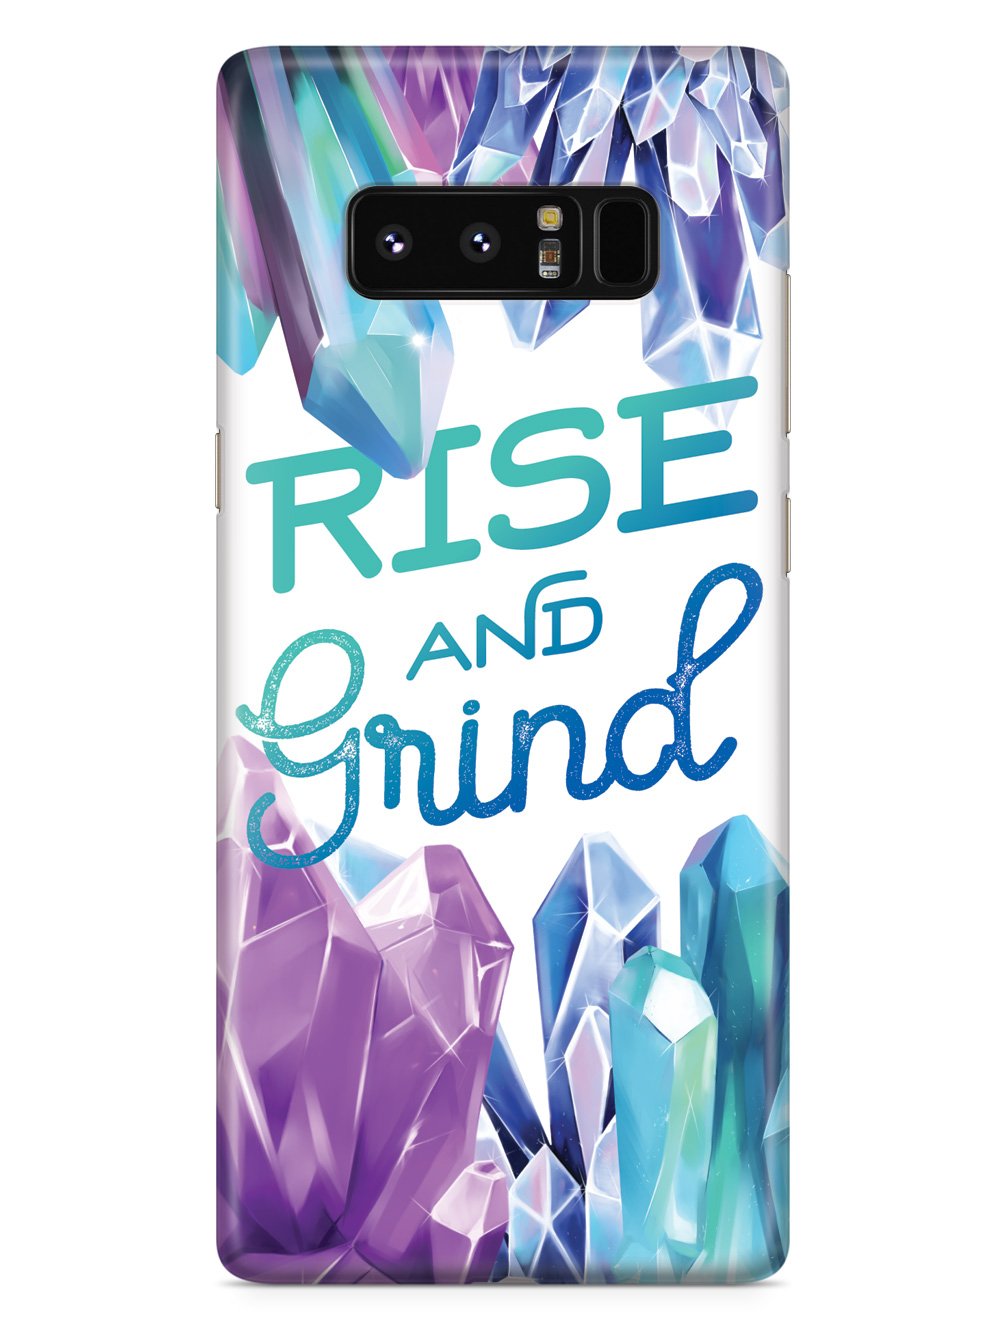 Rise And Grind - White Case